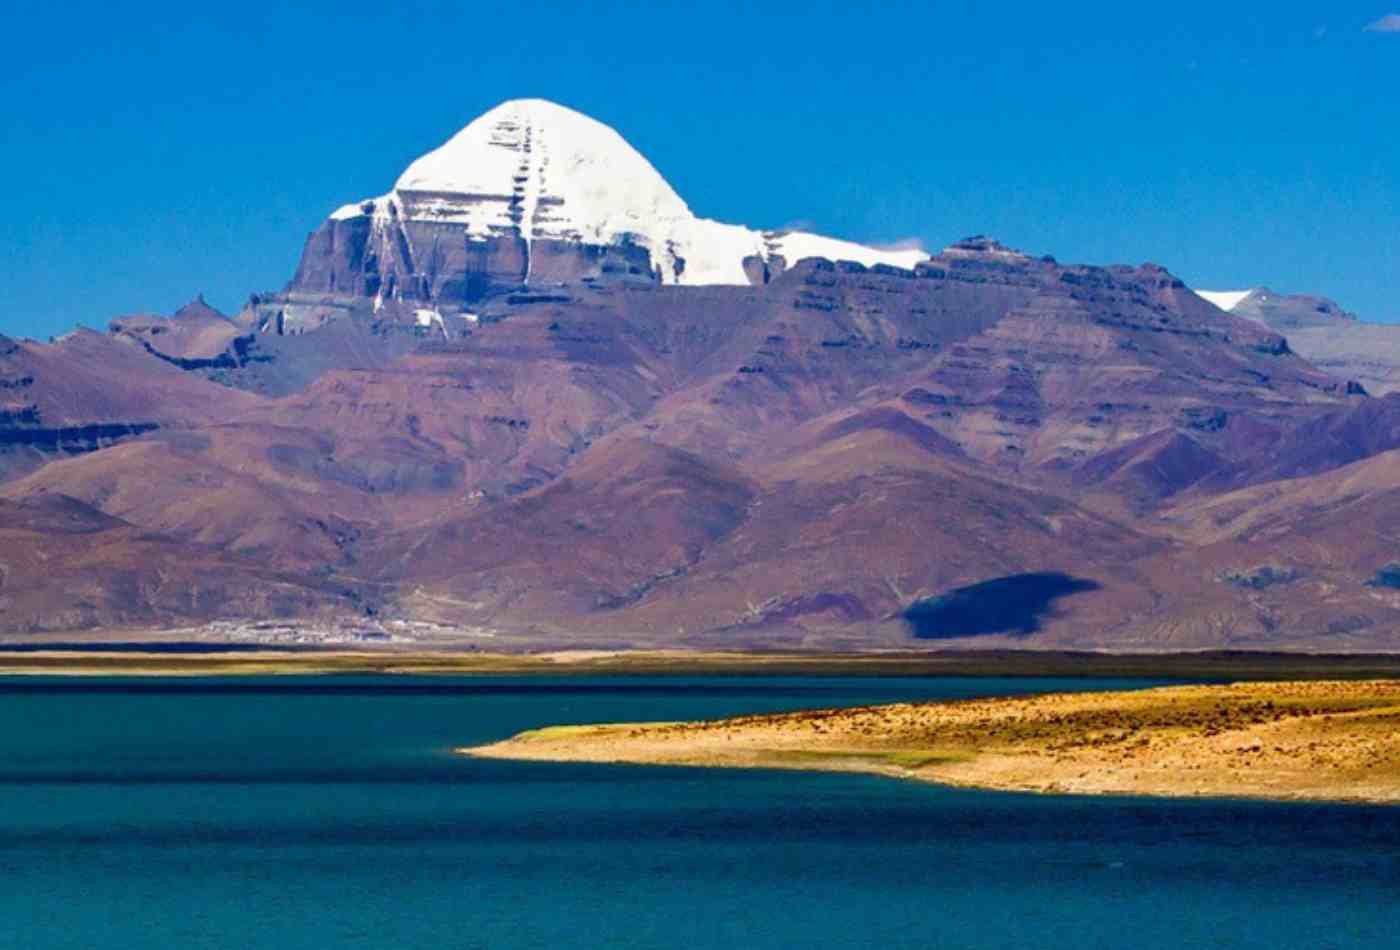 A majestic view of Mt. Kailash, a sacred mountain in Tibet, in a clear sky with a lake in the foreground.